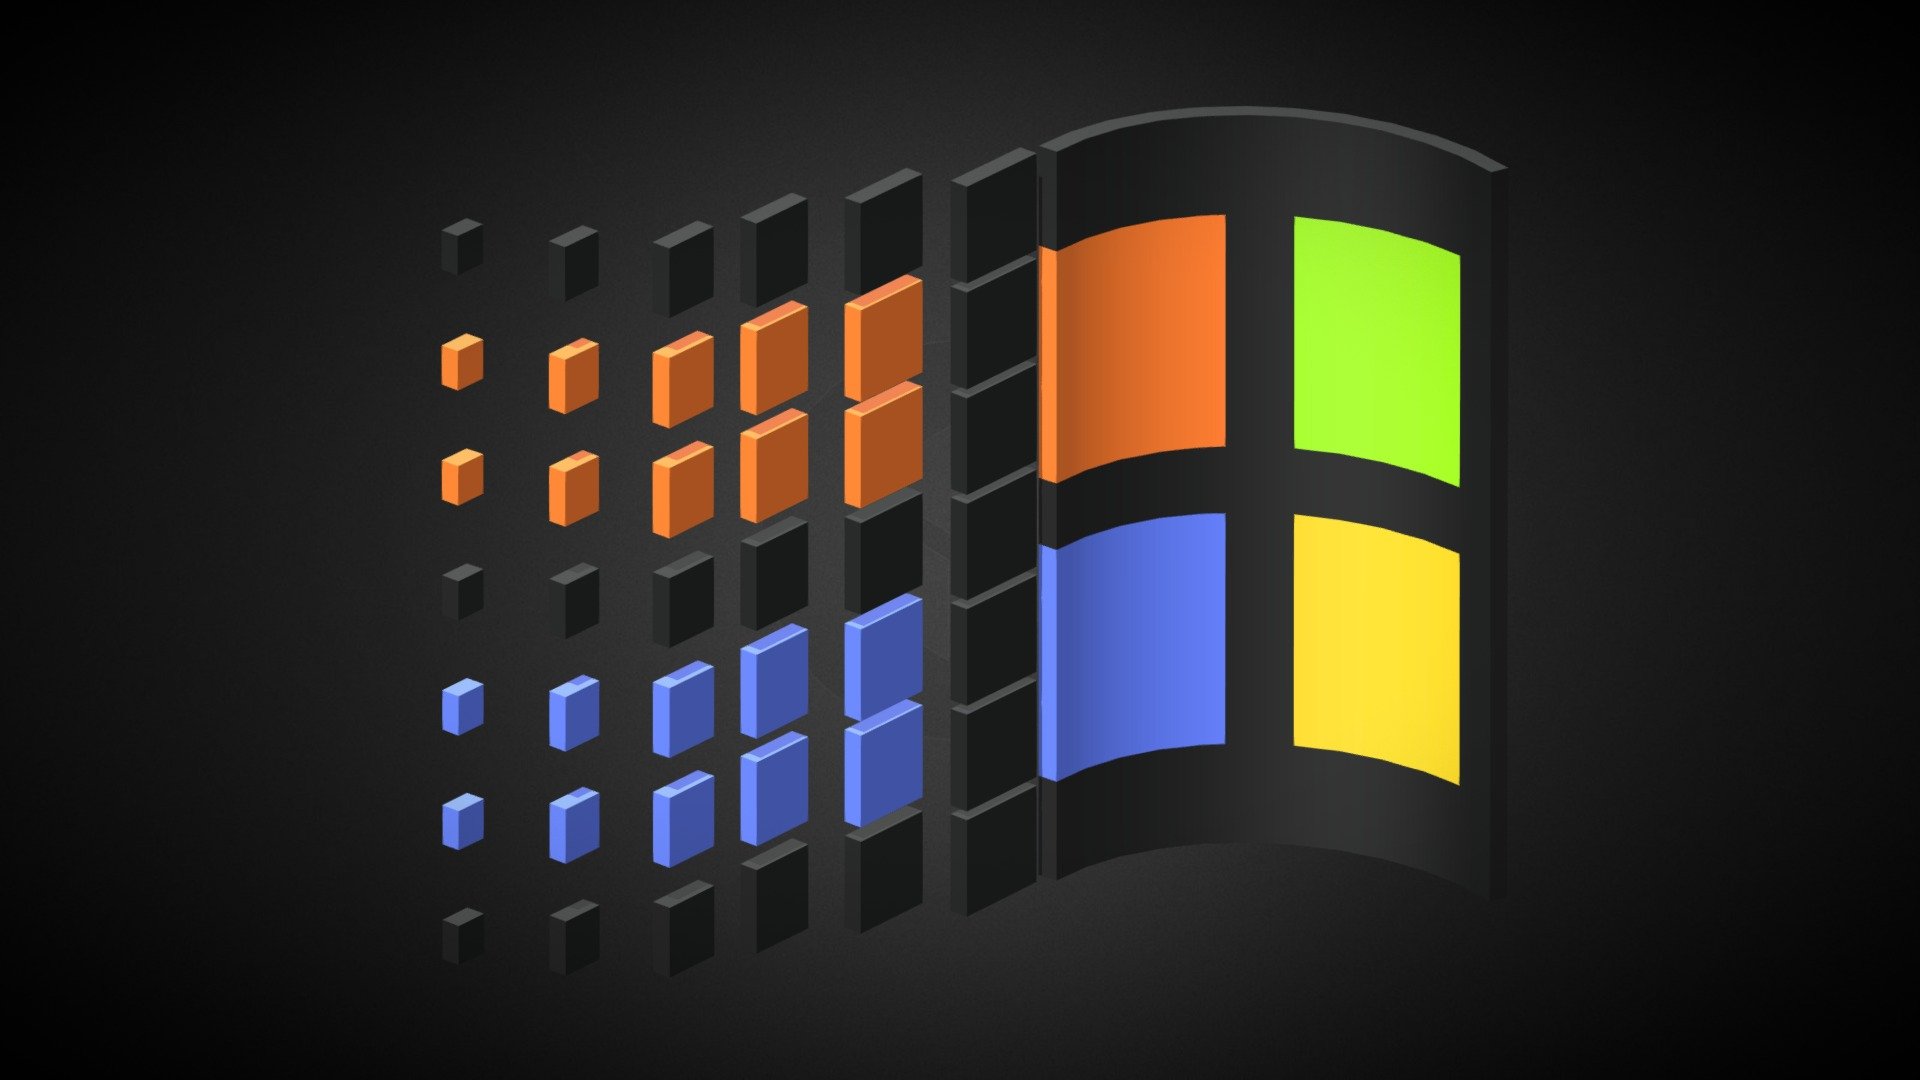 Top 99 windows logo 3d most viewed and downloaded